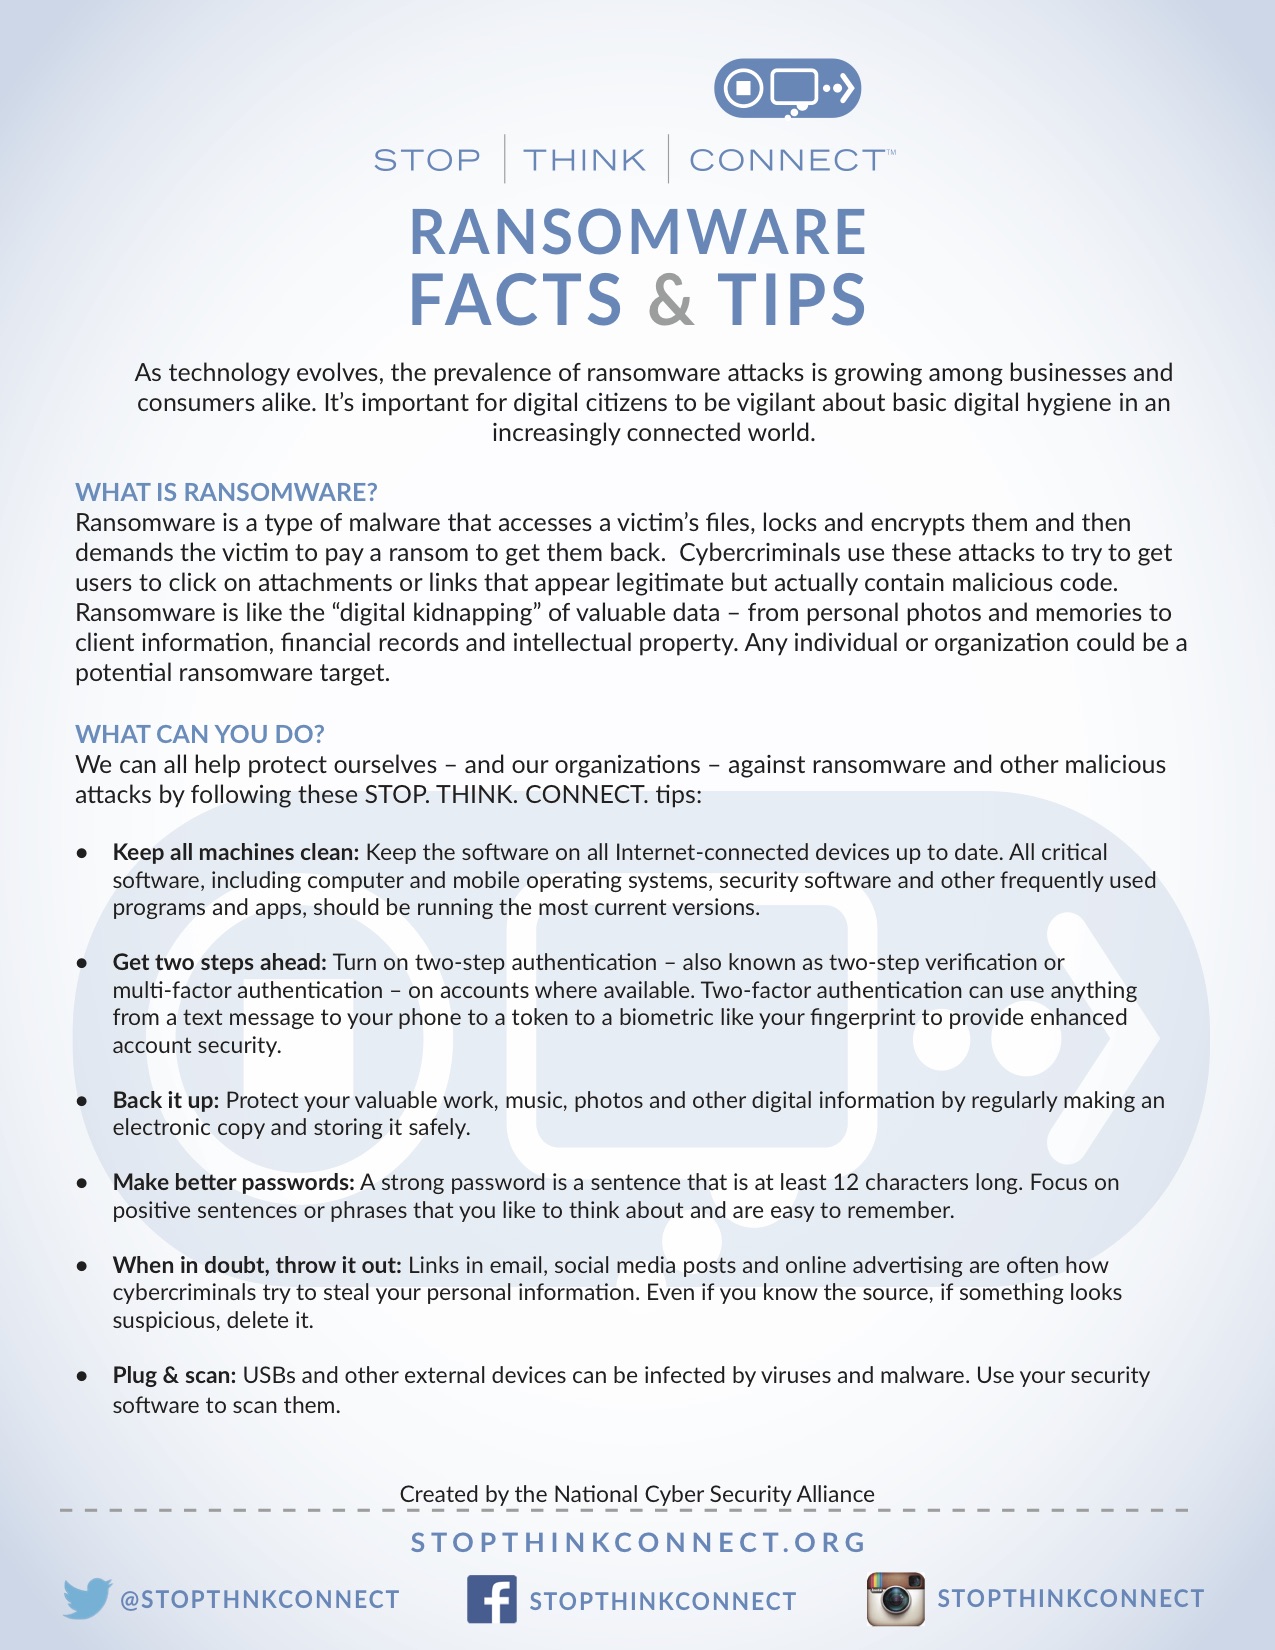 https://www.stopthinkconnect.org/resources/preview/ransomware-facts-and-tips